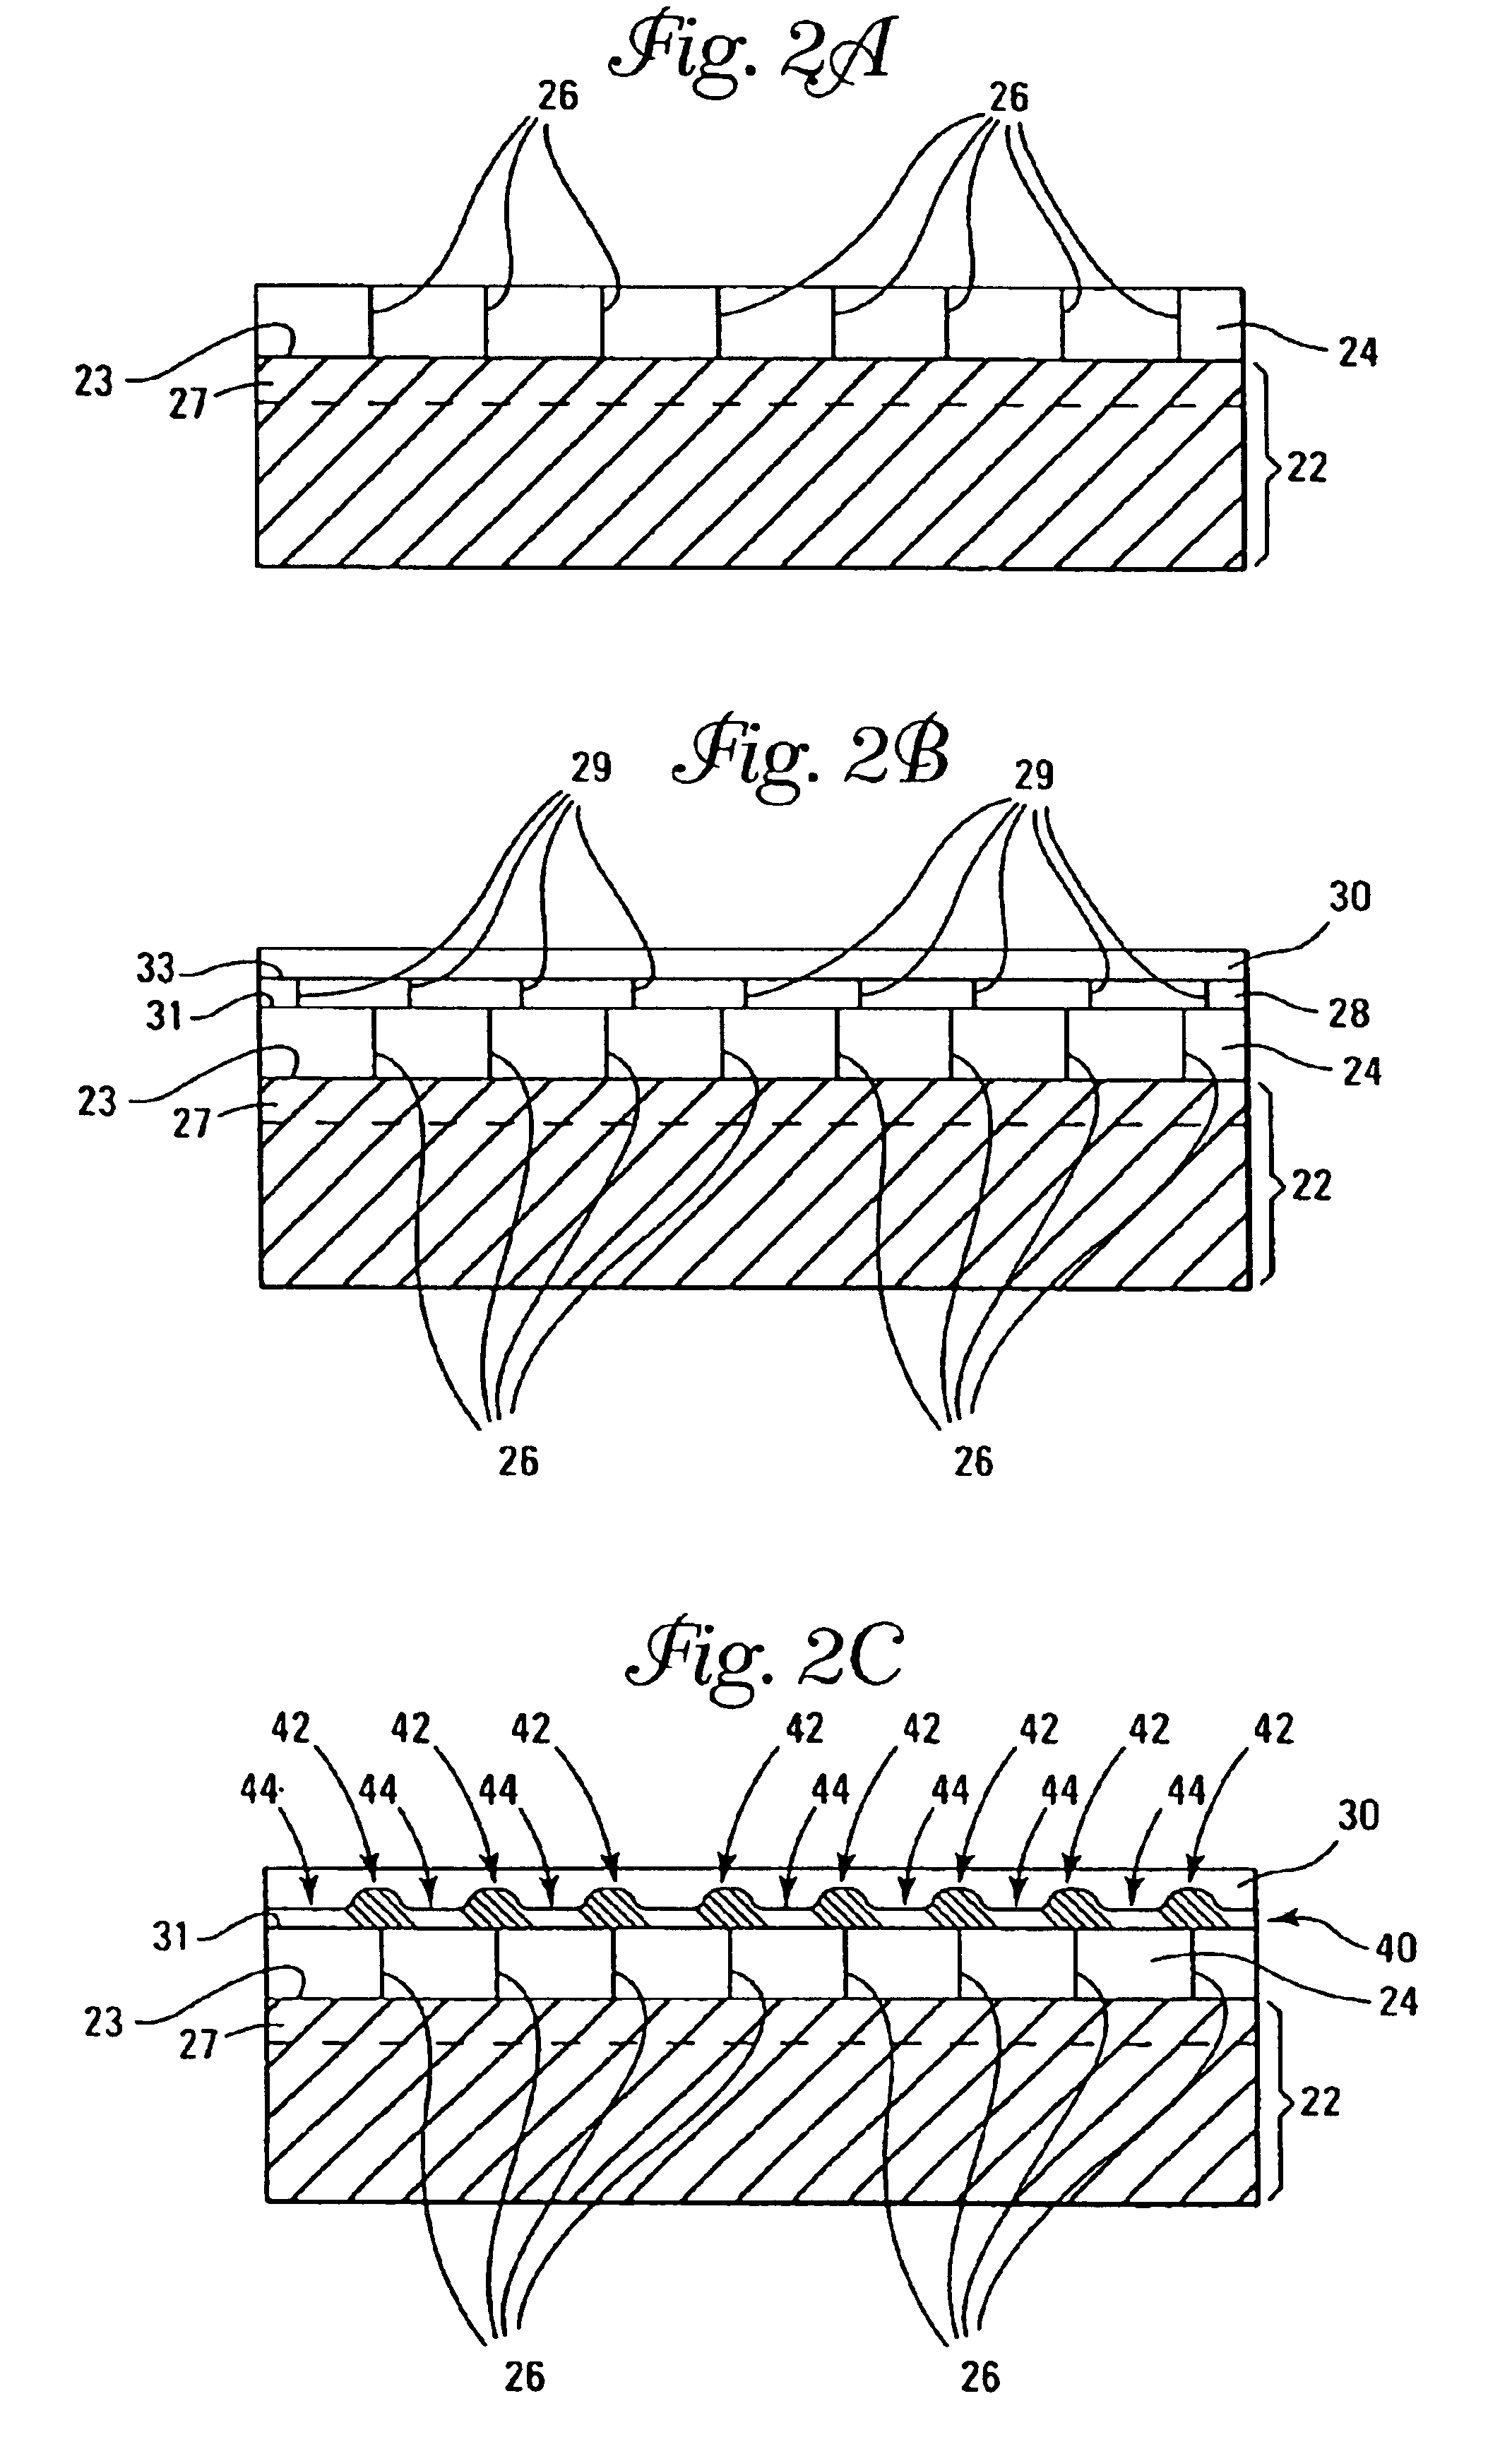 Conductive semiconductor structures containing metal oxide regions